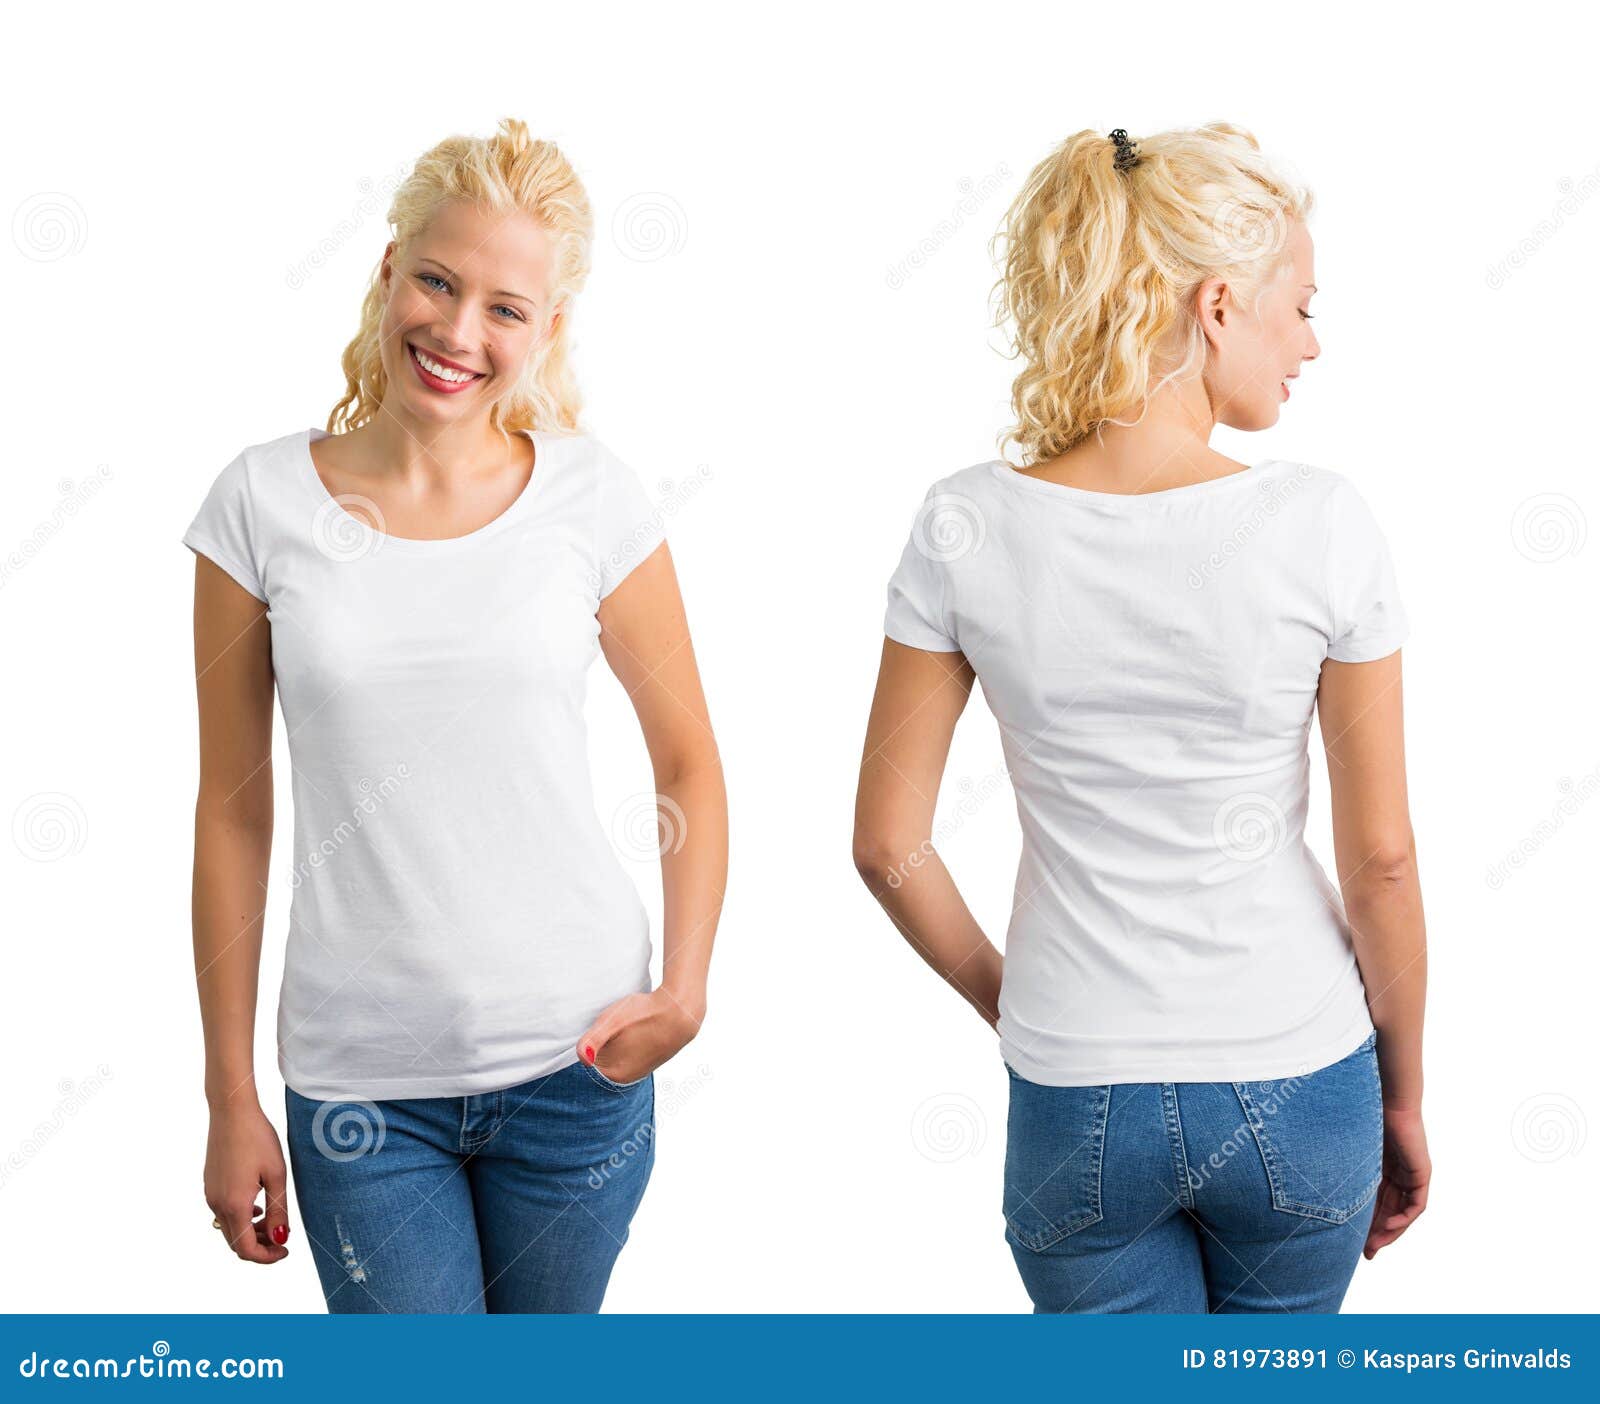 woman in white round neck t-shirt